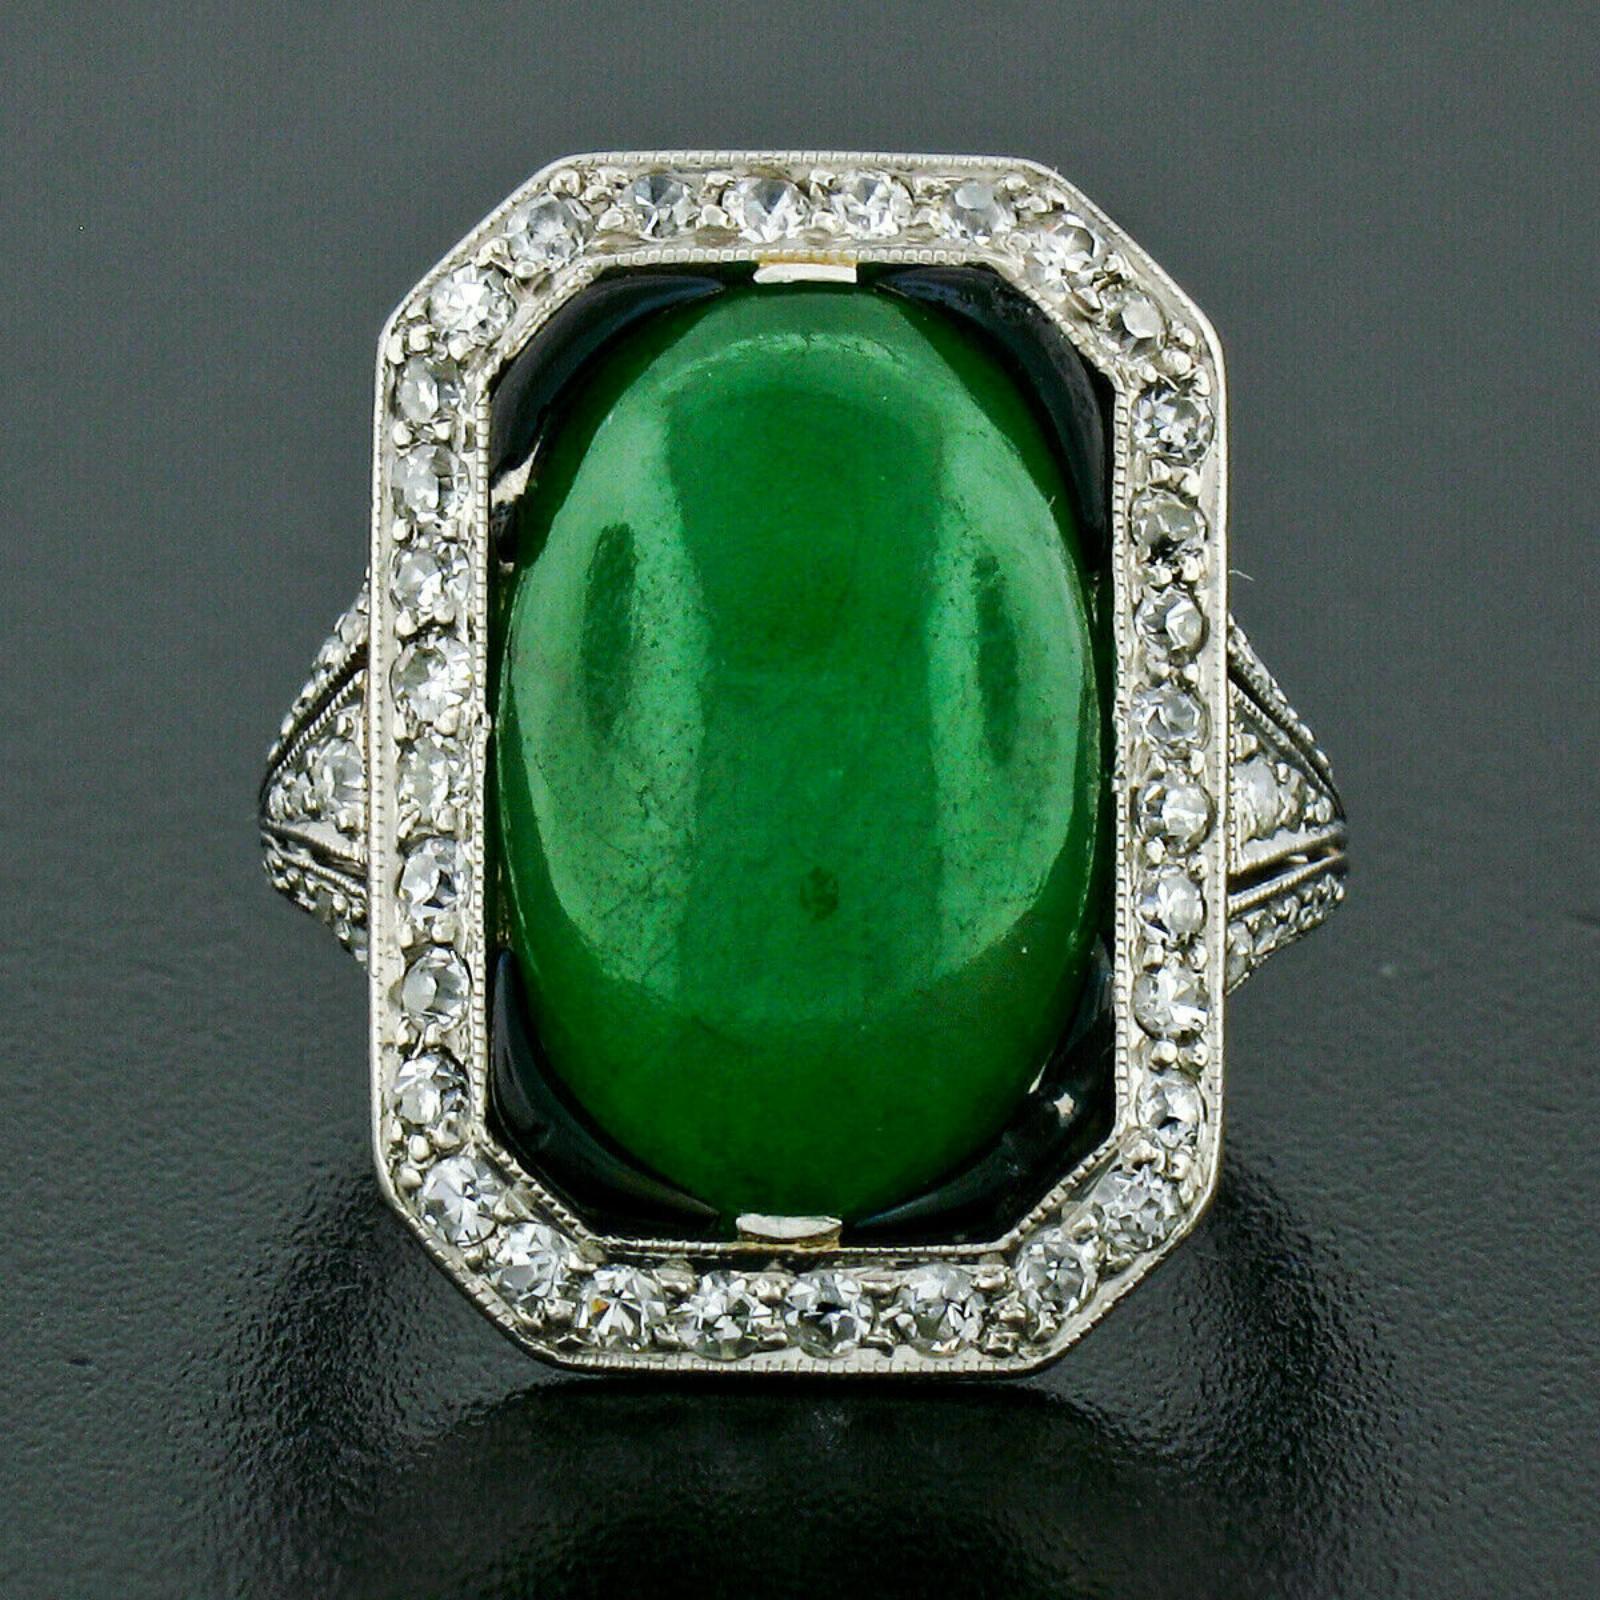 This truly unique and stunning antique art deco period cocktail ring crafted in solid platinum and features a breathtaking, GIA certified, natural jade stone that displays very rich and desirable green color over its oval cabochon shape. The stone